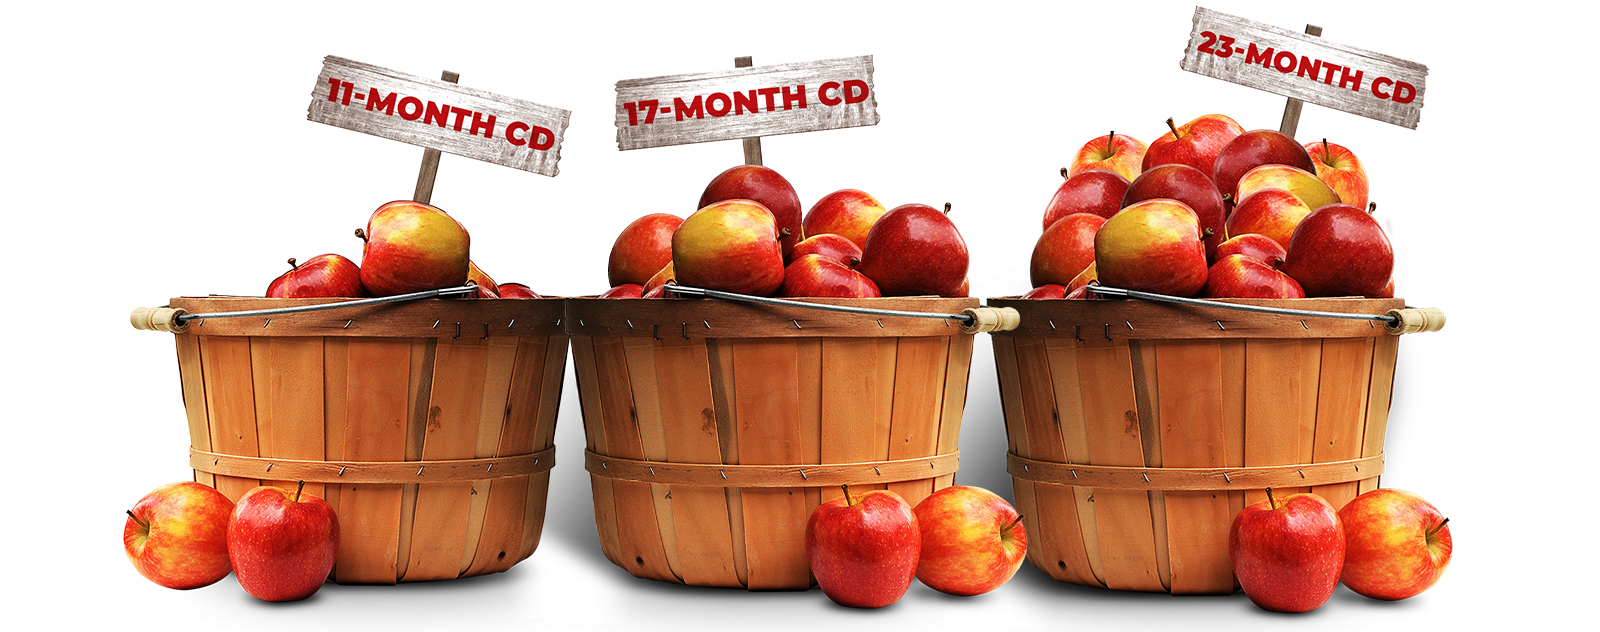 Buckets of apples with time period cards of 11, 17, and 23 months